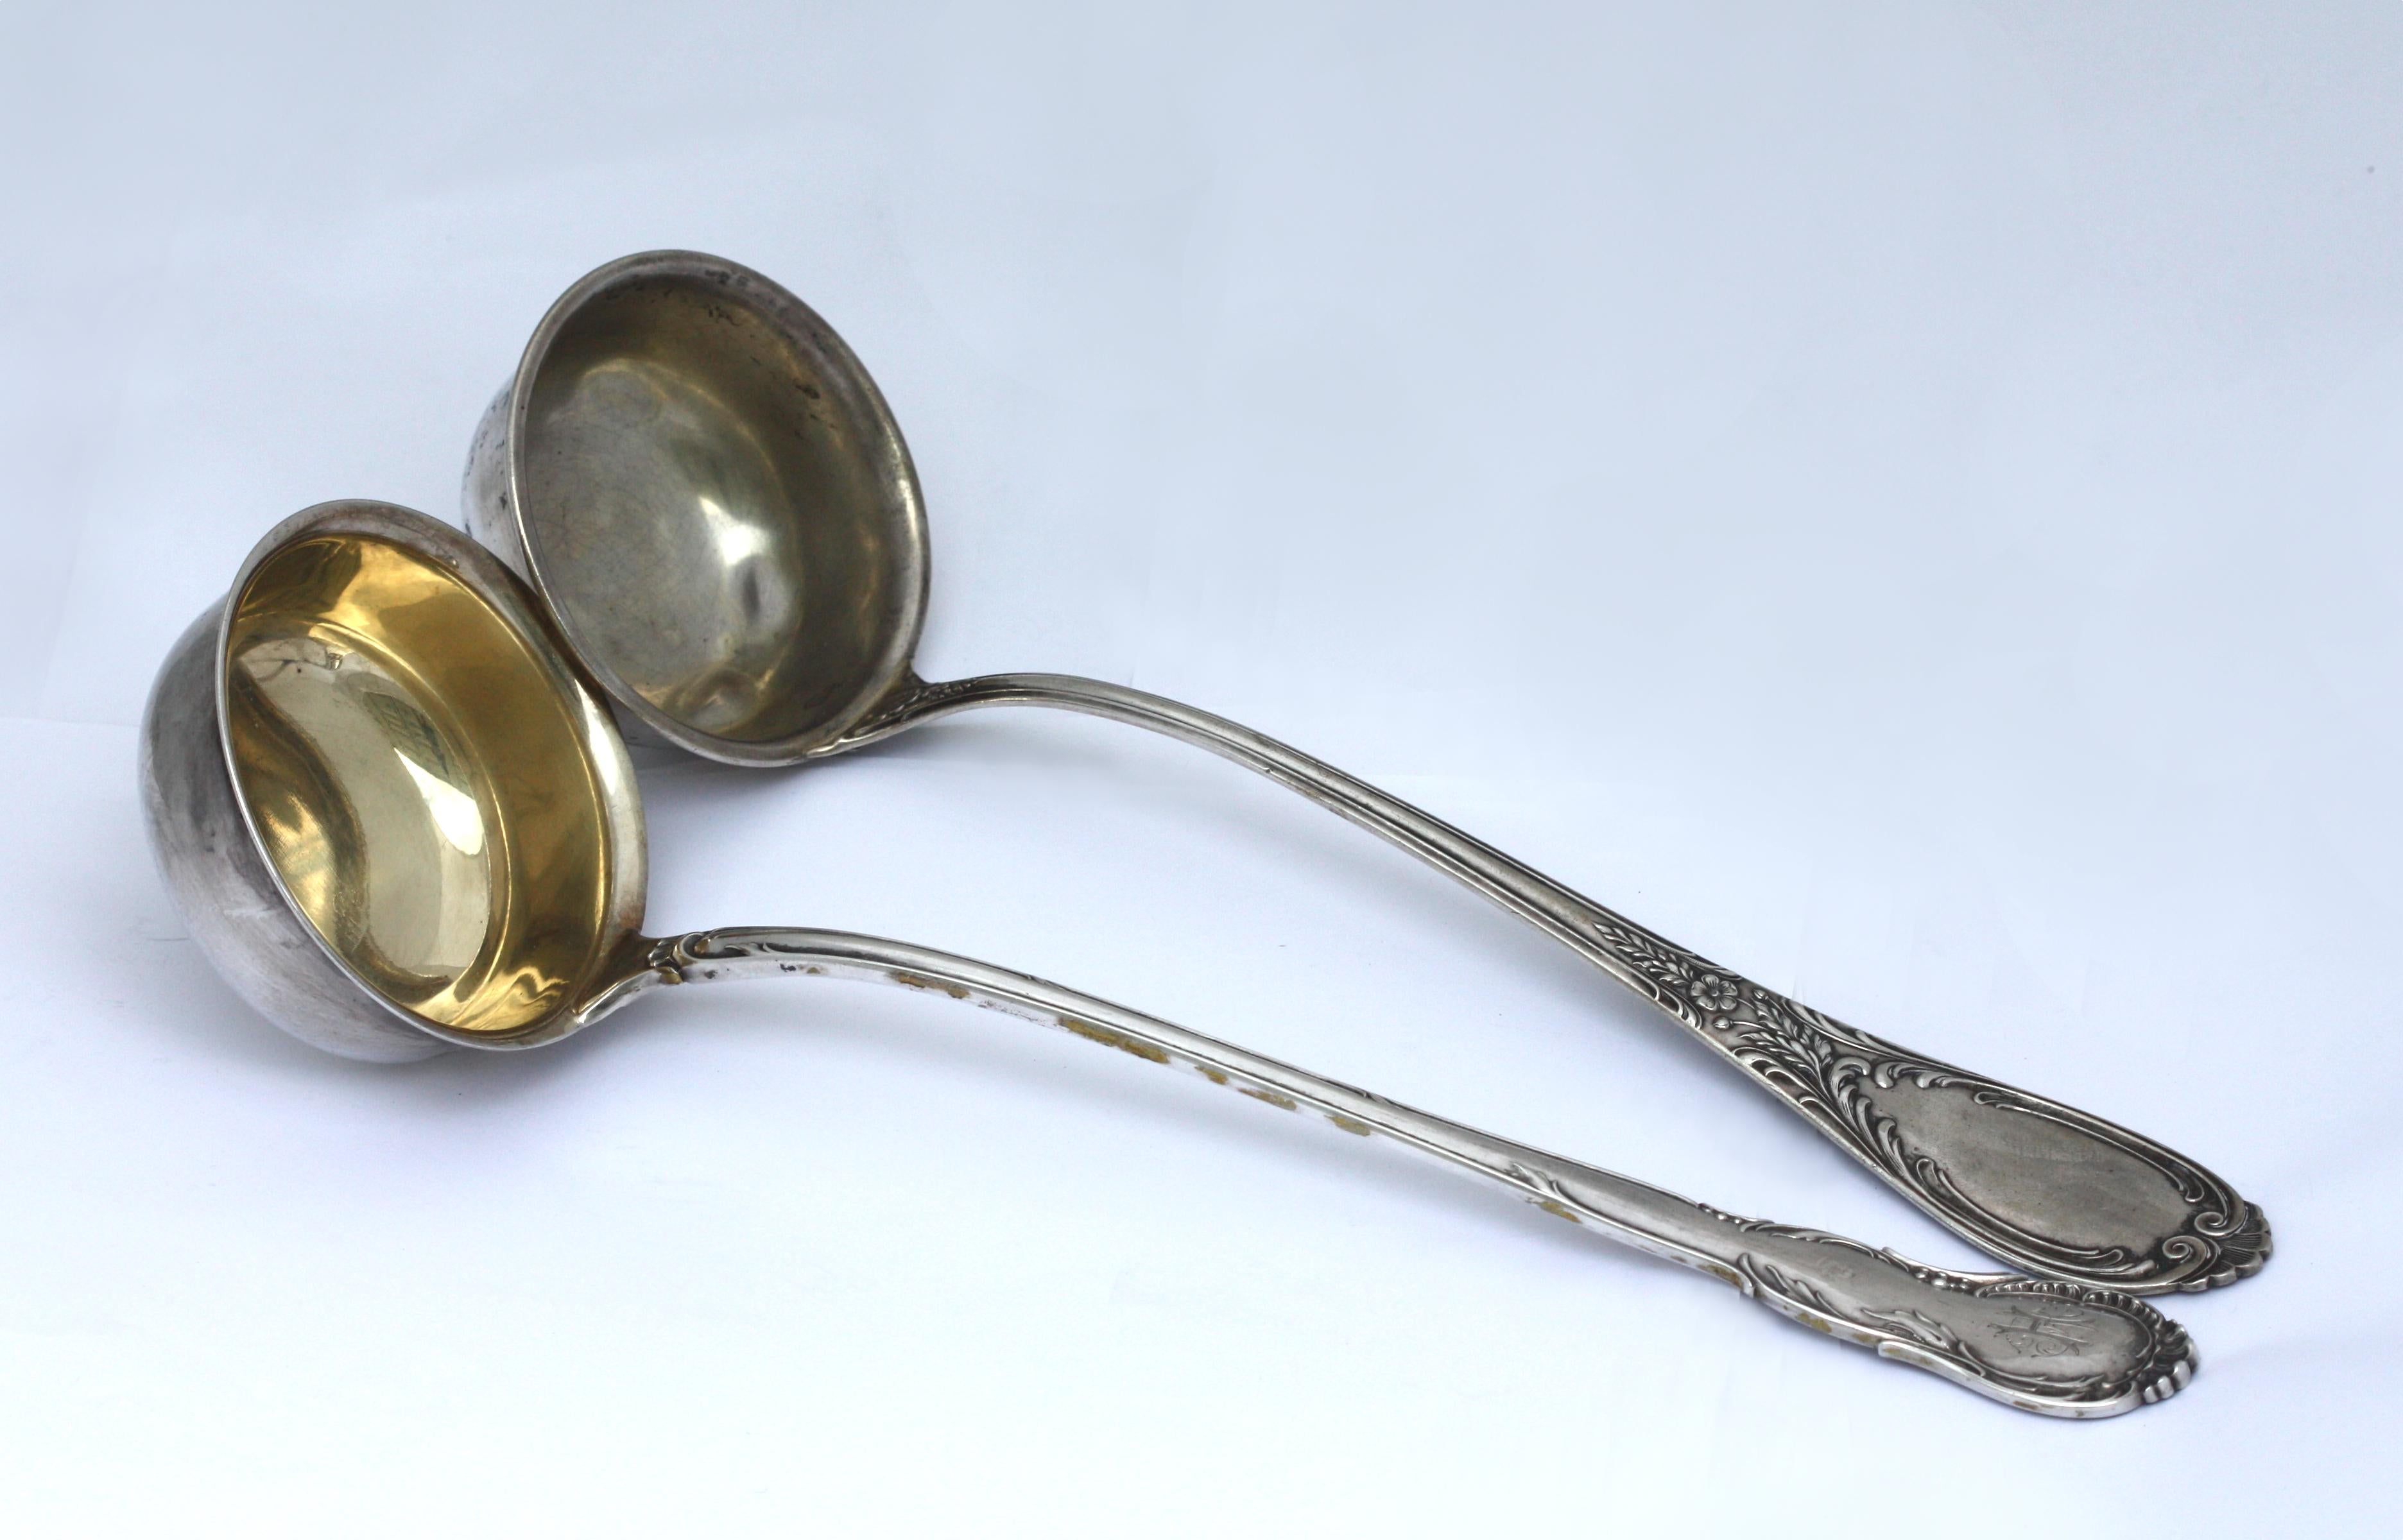 
Two Similar Continental Silver Soup Ladles
One marked 800, other marks worn, the second, marked A.C.T. SCHIENT SCMY 800, with two further indistinct marks. Both chased with foliate scrolls, one monogrammed.
Length 13.25 in. (33.65 cm.), 18.6